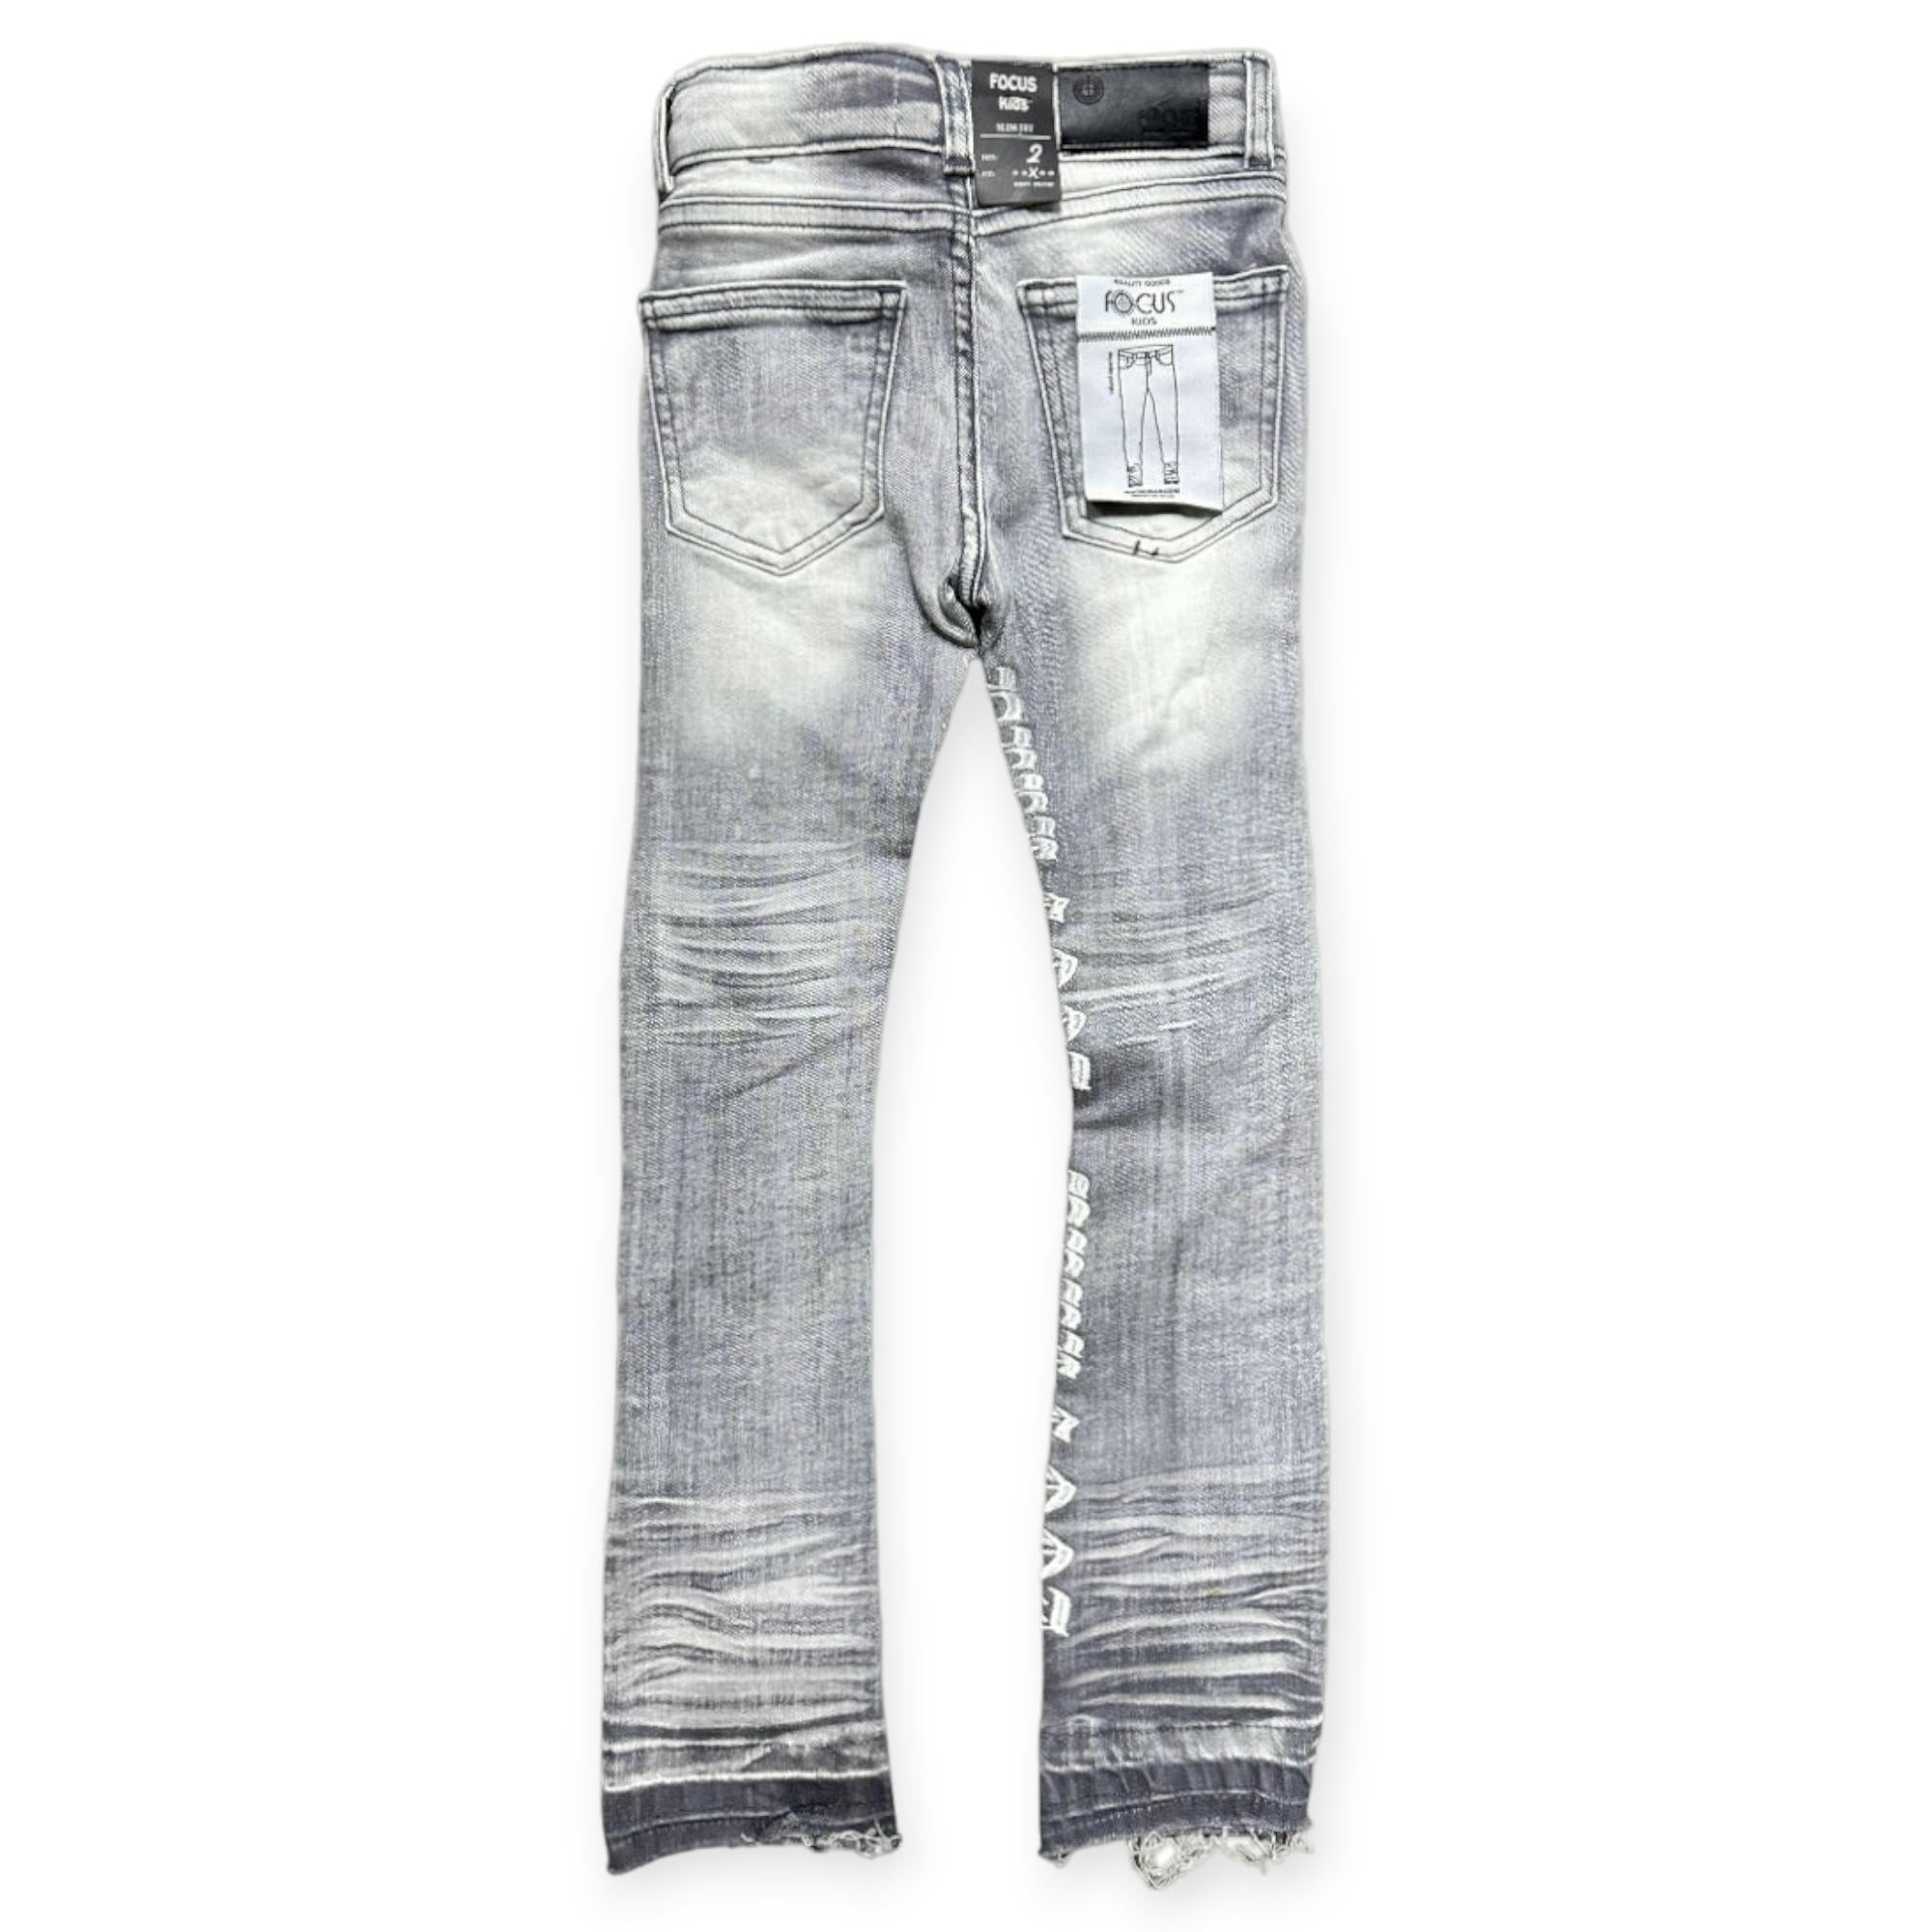 Focus Jeans Good Stacked (Grey)